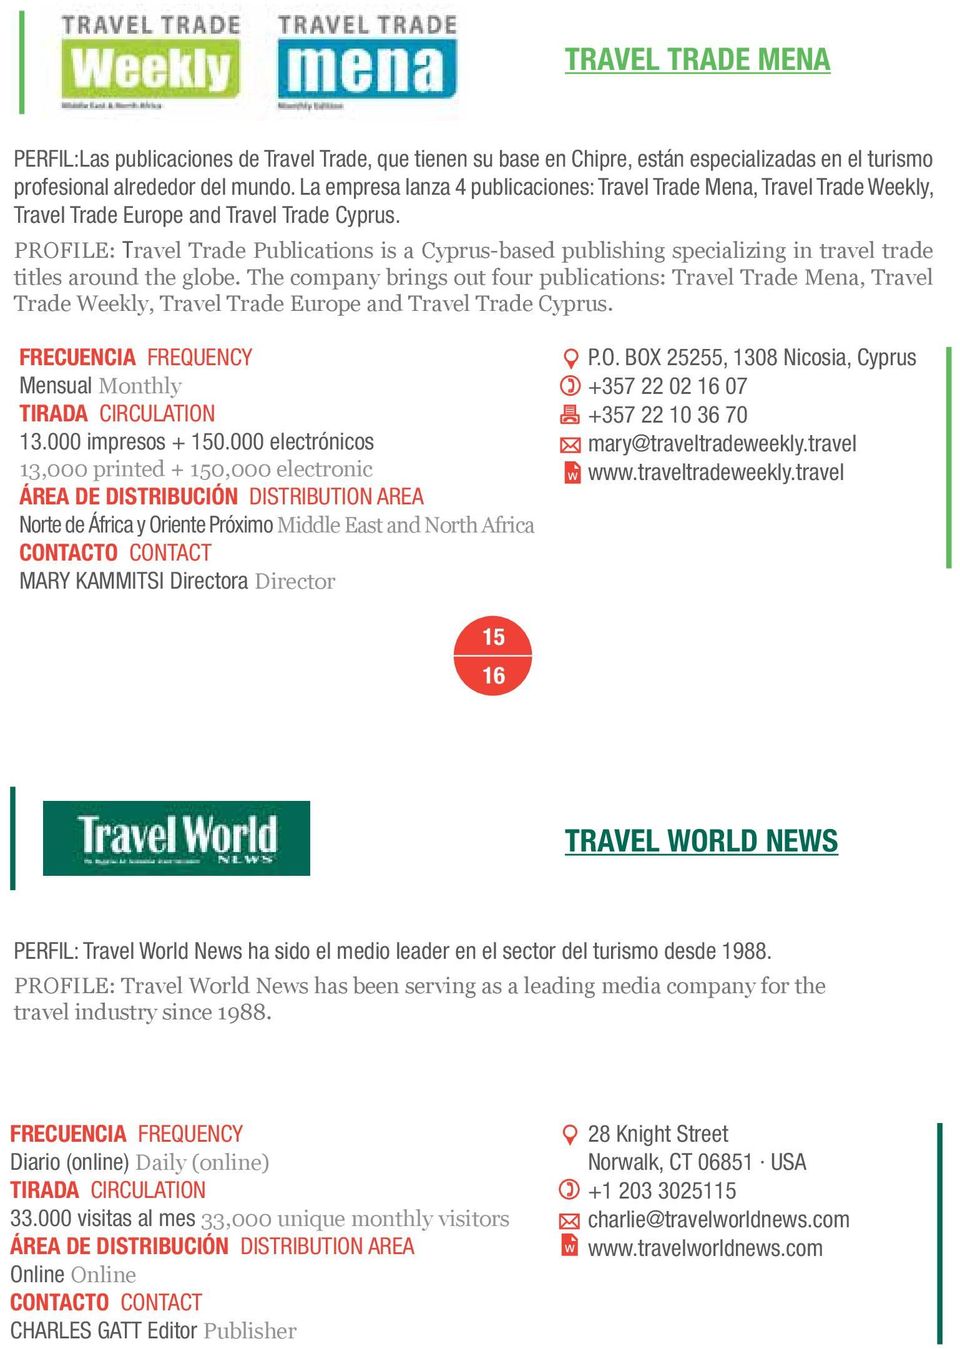 PROFILE: Travel Trade Publications is a Cyprus-based publishing specializing in travel trade titles around the globe.